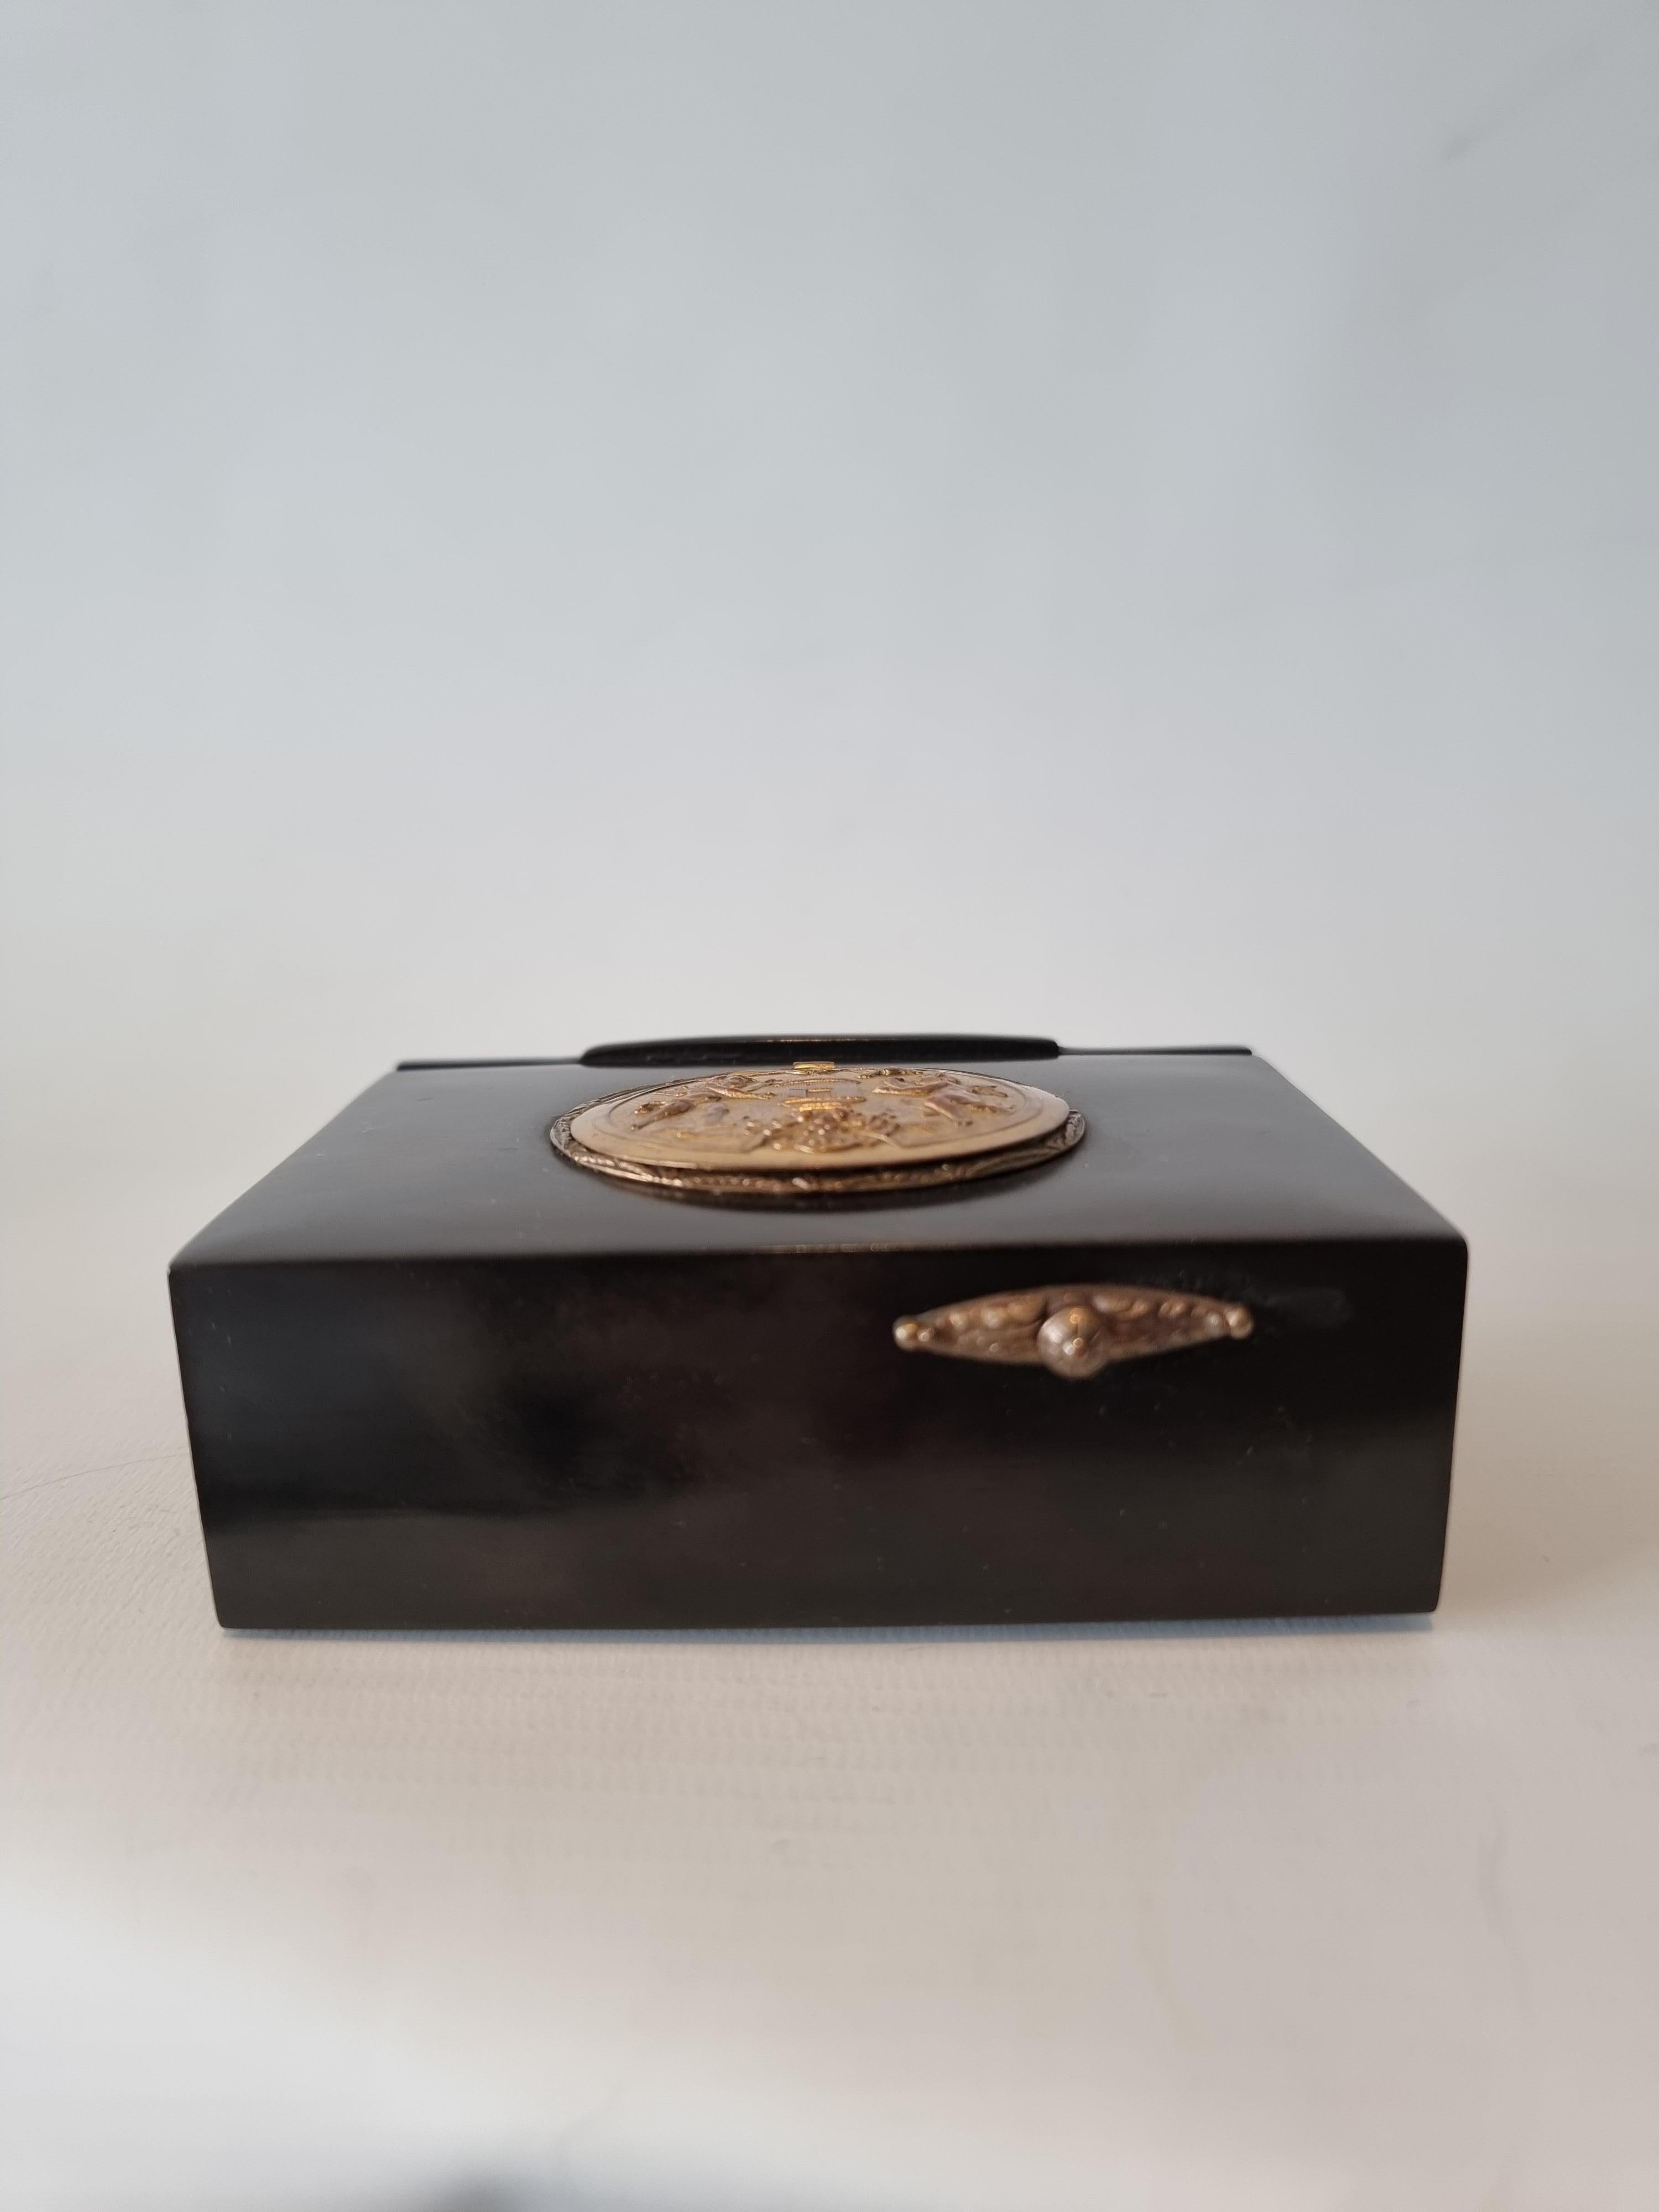 A good antique composition tortoiseshell and gilt metal singing bird box,

 

German

 

circa 1900

 

Going-barrel movement

 

Setting the birds free...

 

When wound and the start/stop button slide moved to the right, the bird emerges through